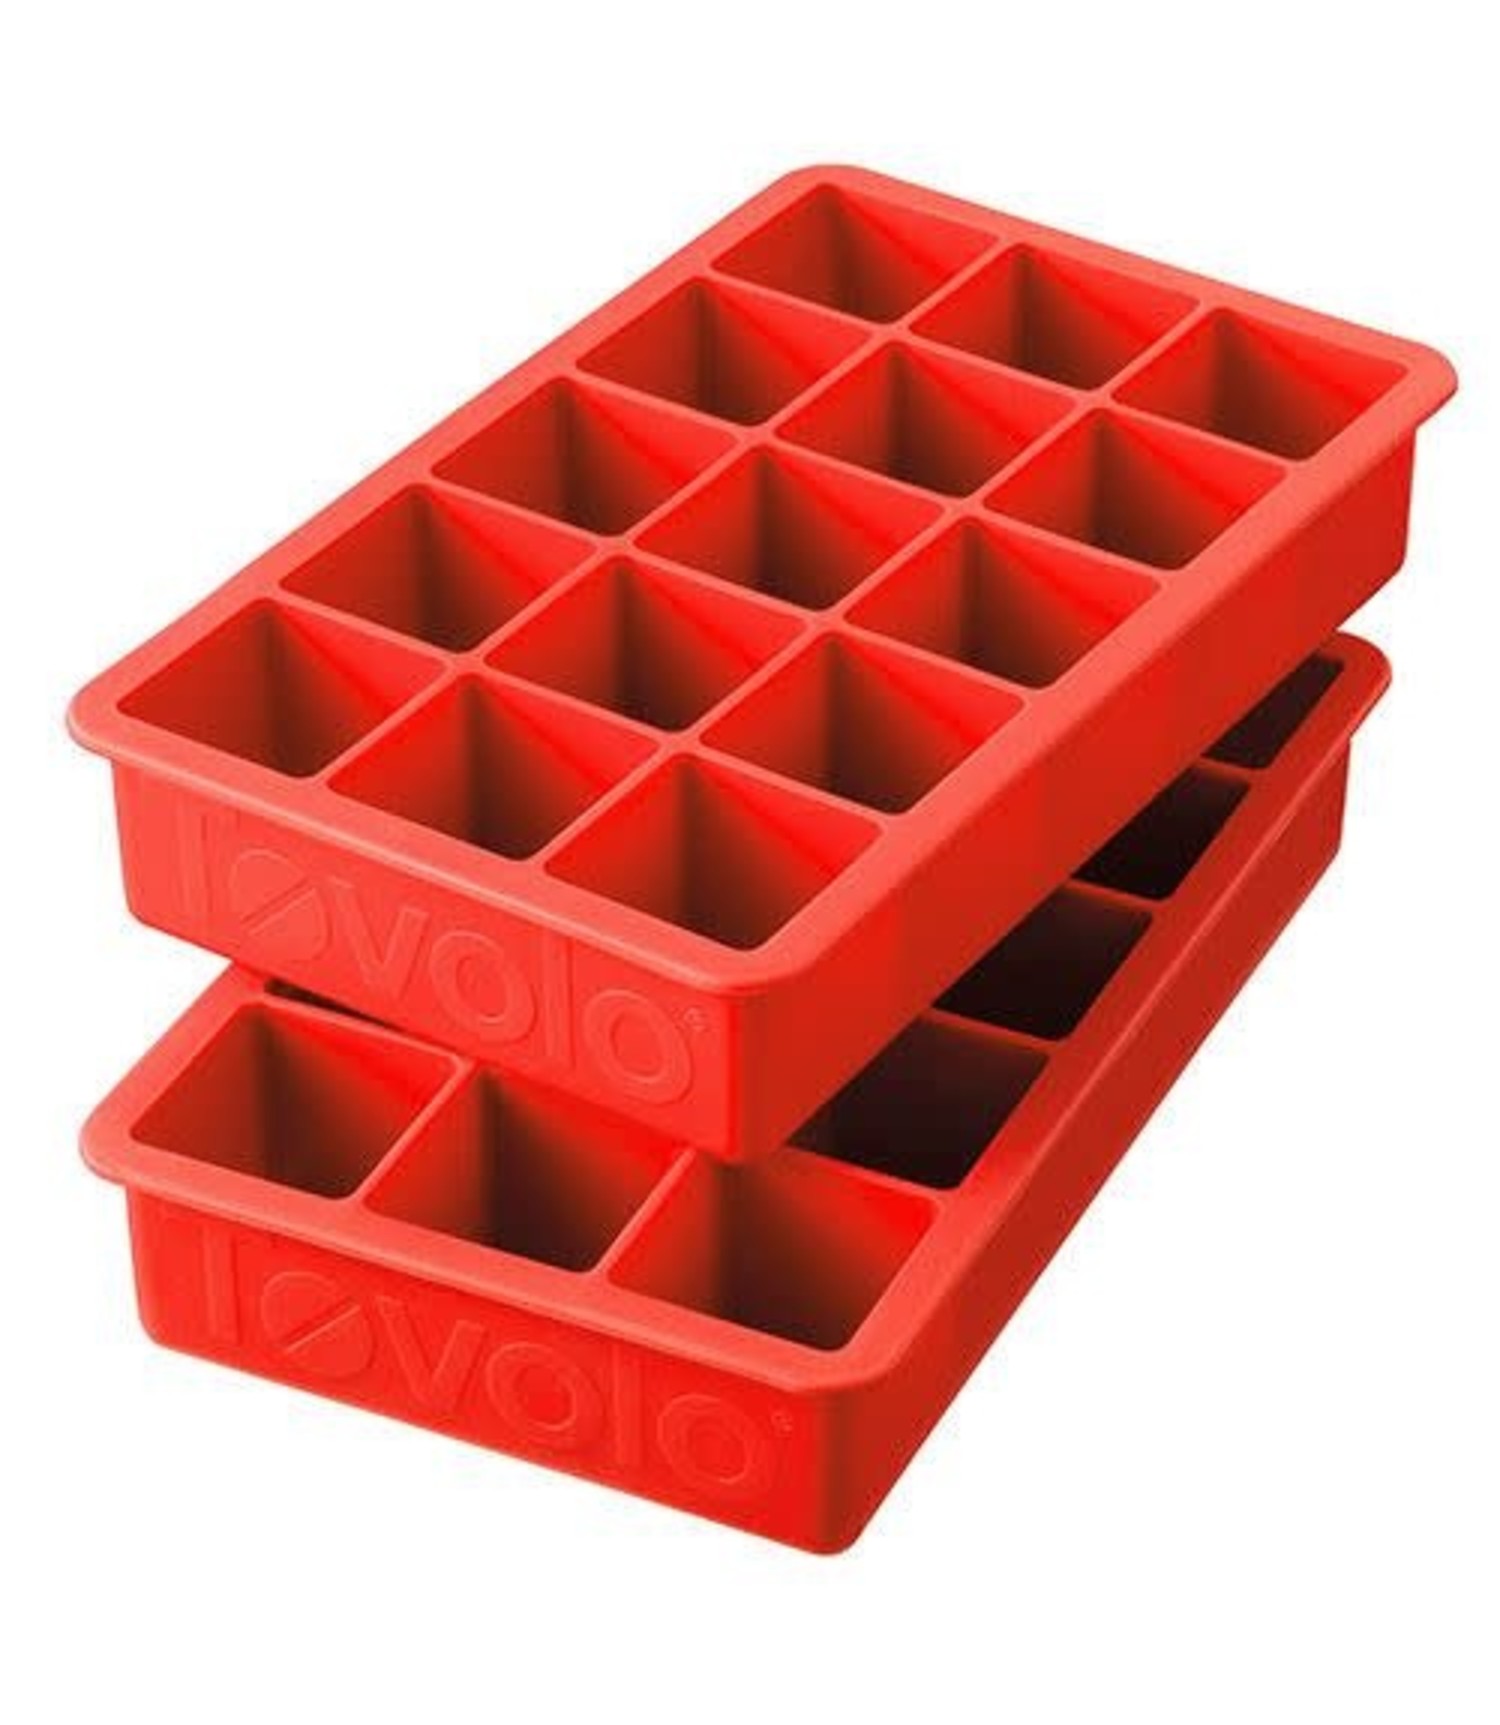 WOPO2258 / 4 Holes Large Square Ice Cube Tray